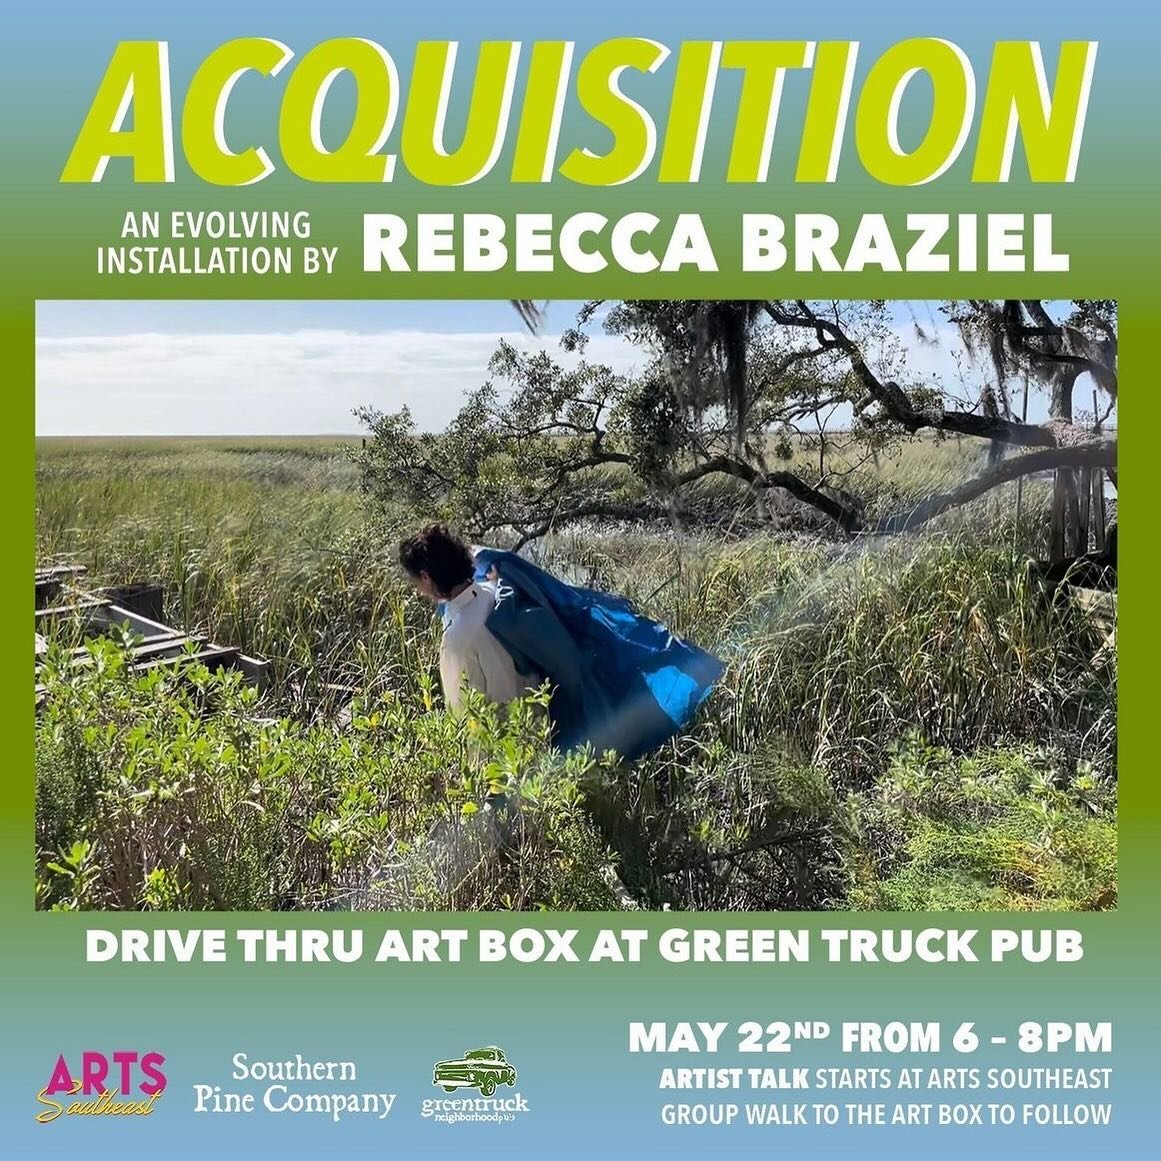 TONIGHT! Weds, May 22nd, 6 - 8PM: Join us for an Artist Talk and walk with Rebecca Braziel @rebeccabraziel in conjunction with her project &ldquo;Acquisition&rdquo; in the #DriveThruArtBox at @greentruckpub 

&bull;Artist Talk at ARTS Southeast (2301